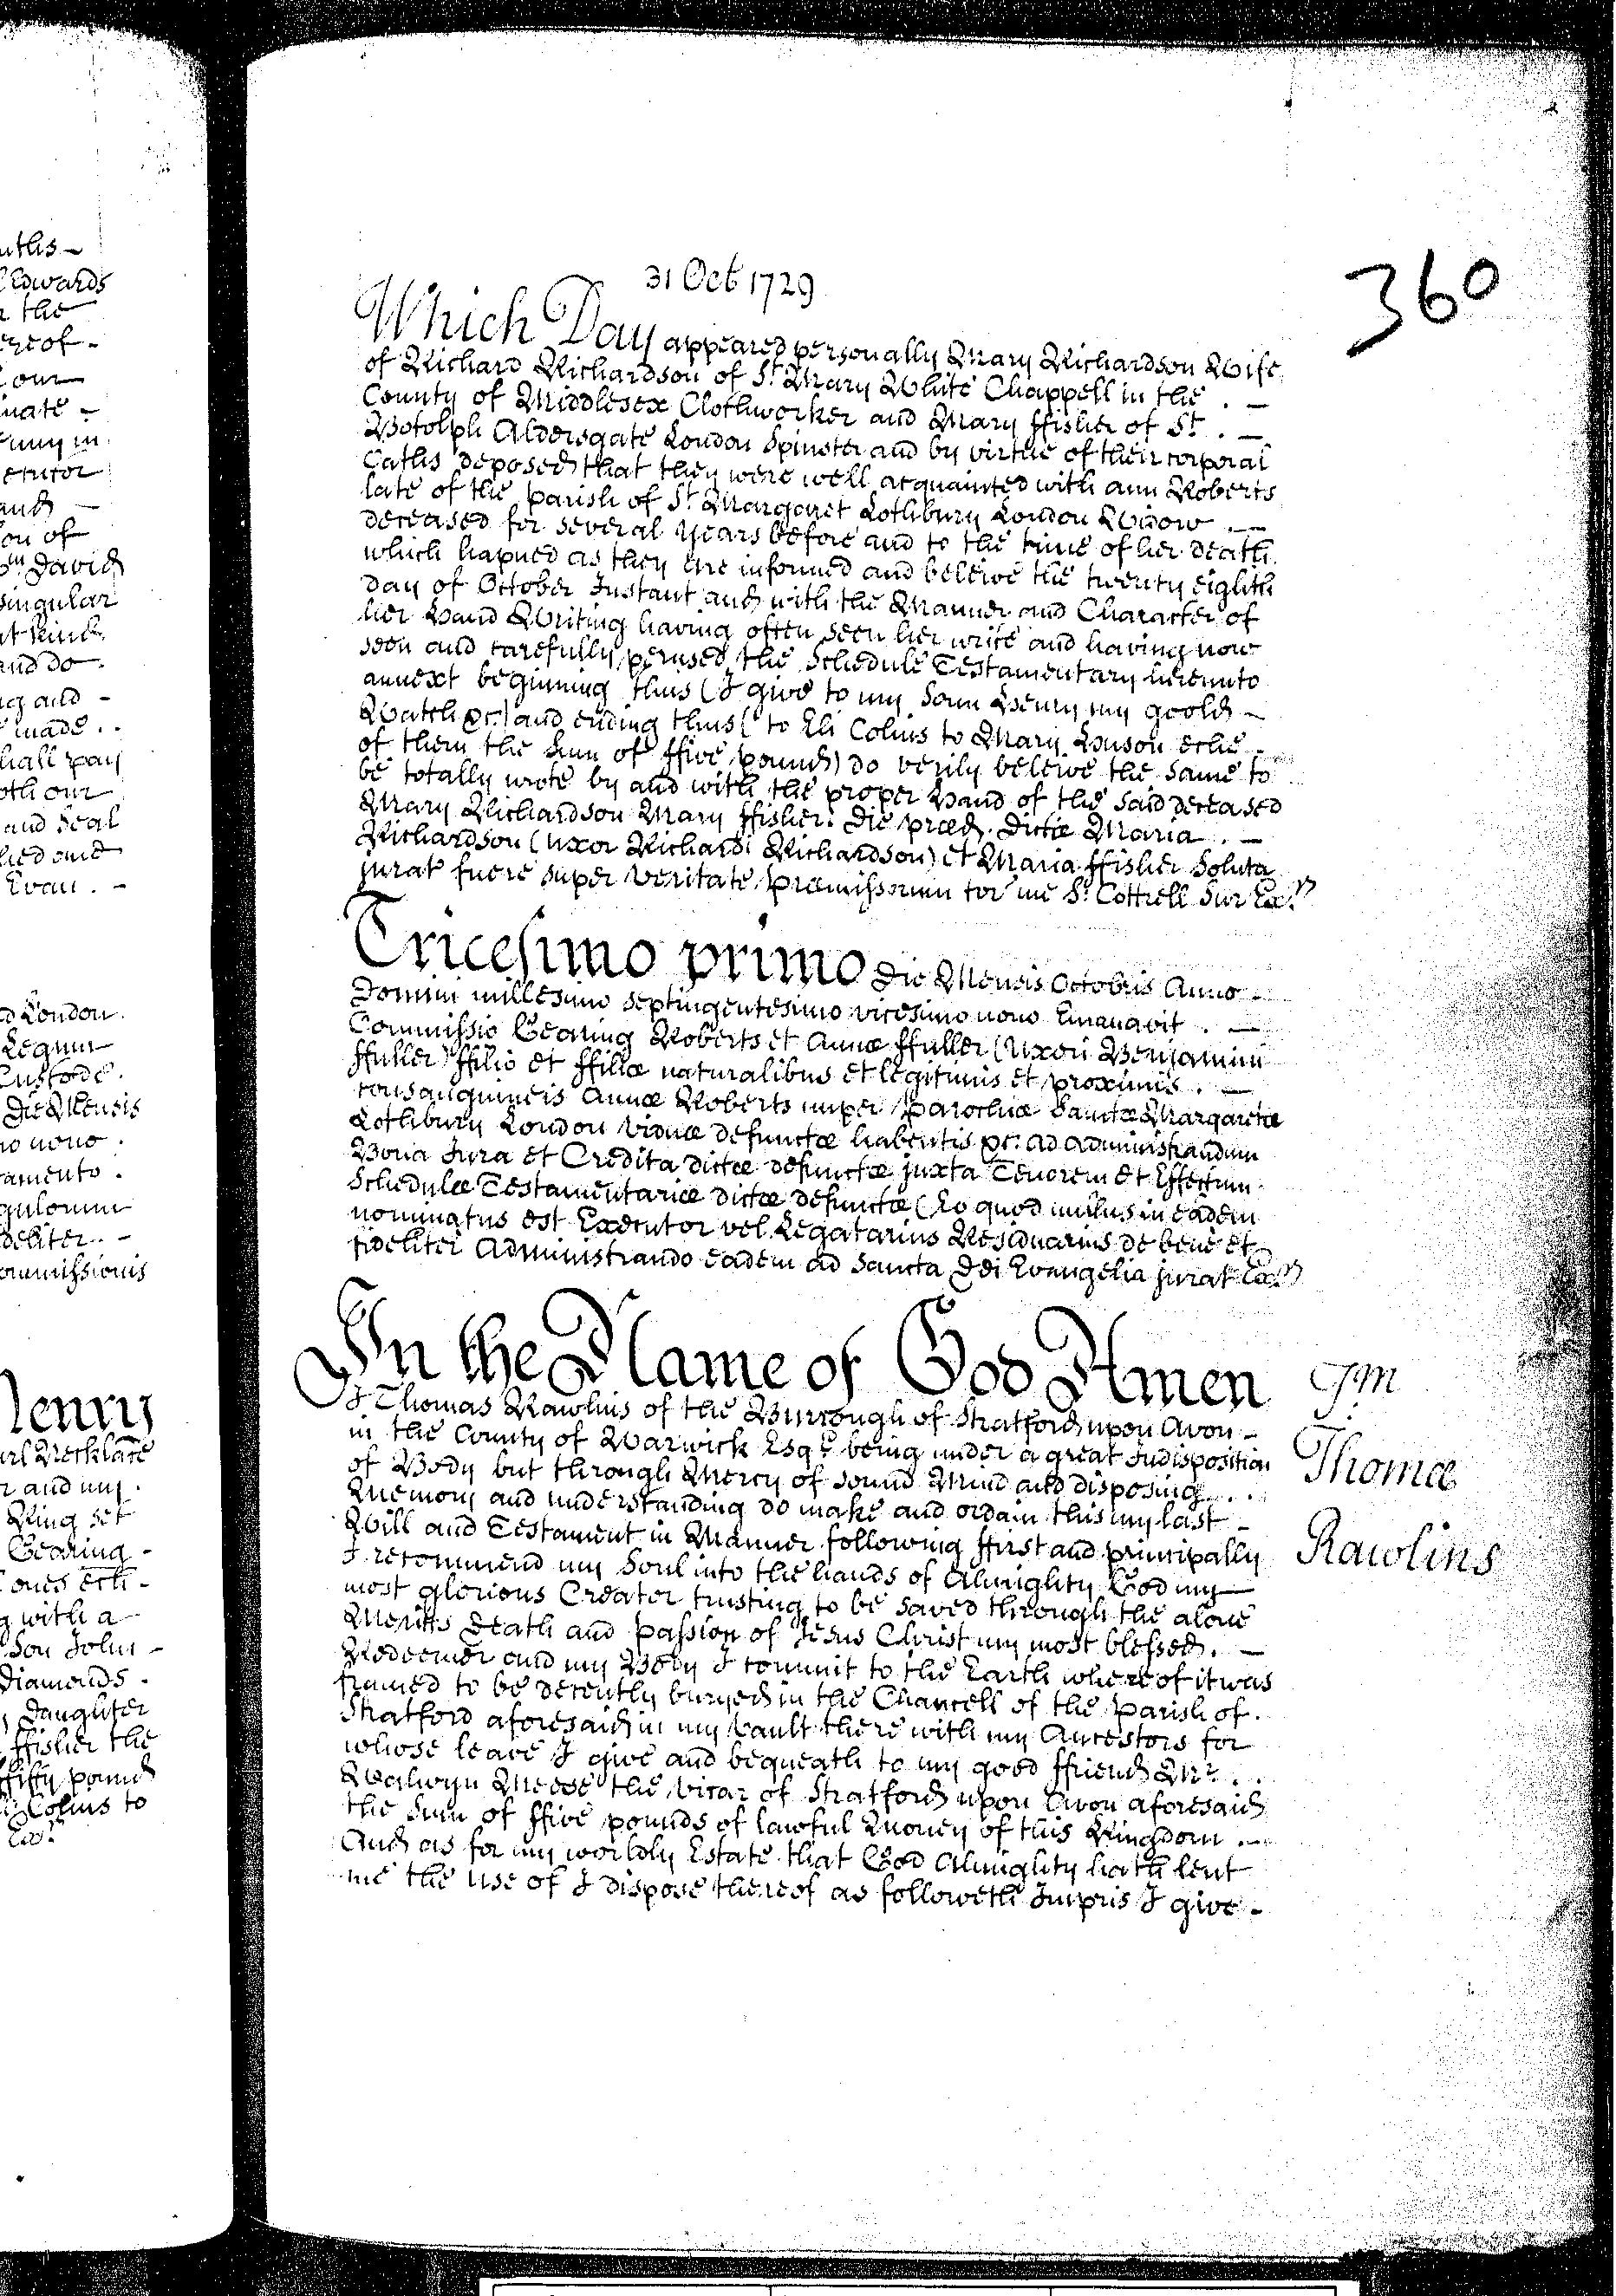 Ann Roberts will of 1729, page 2